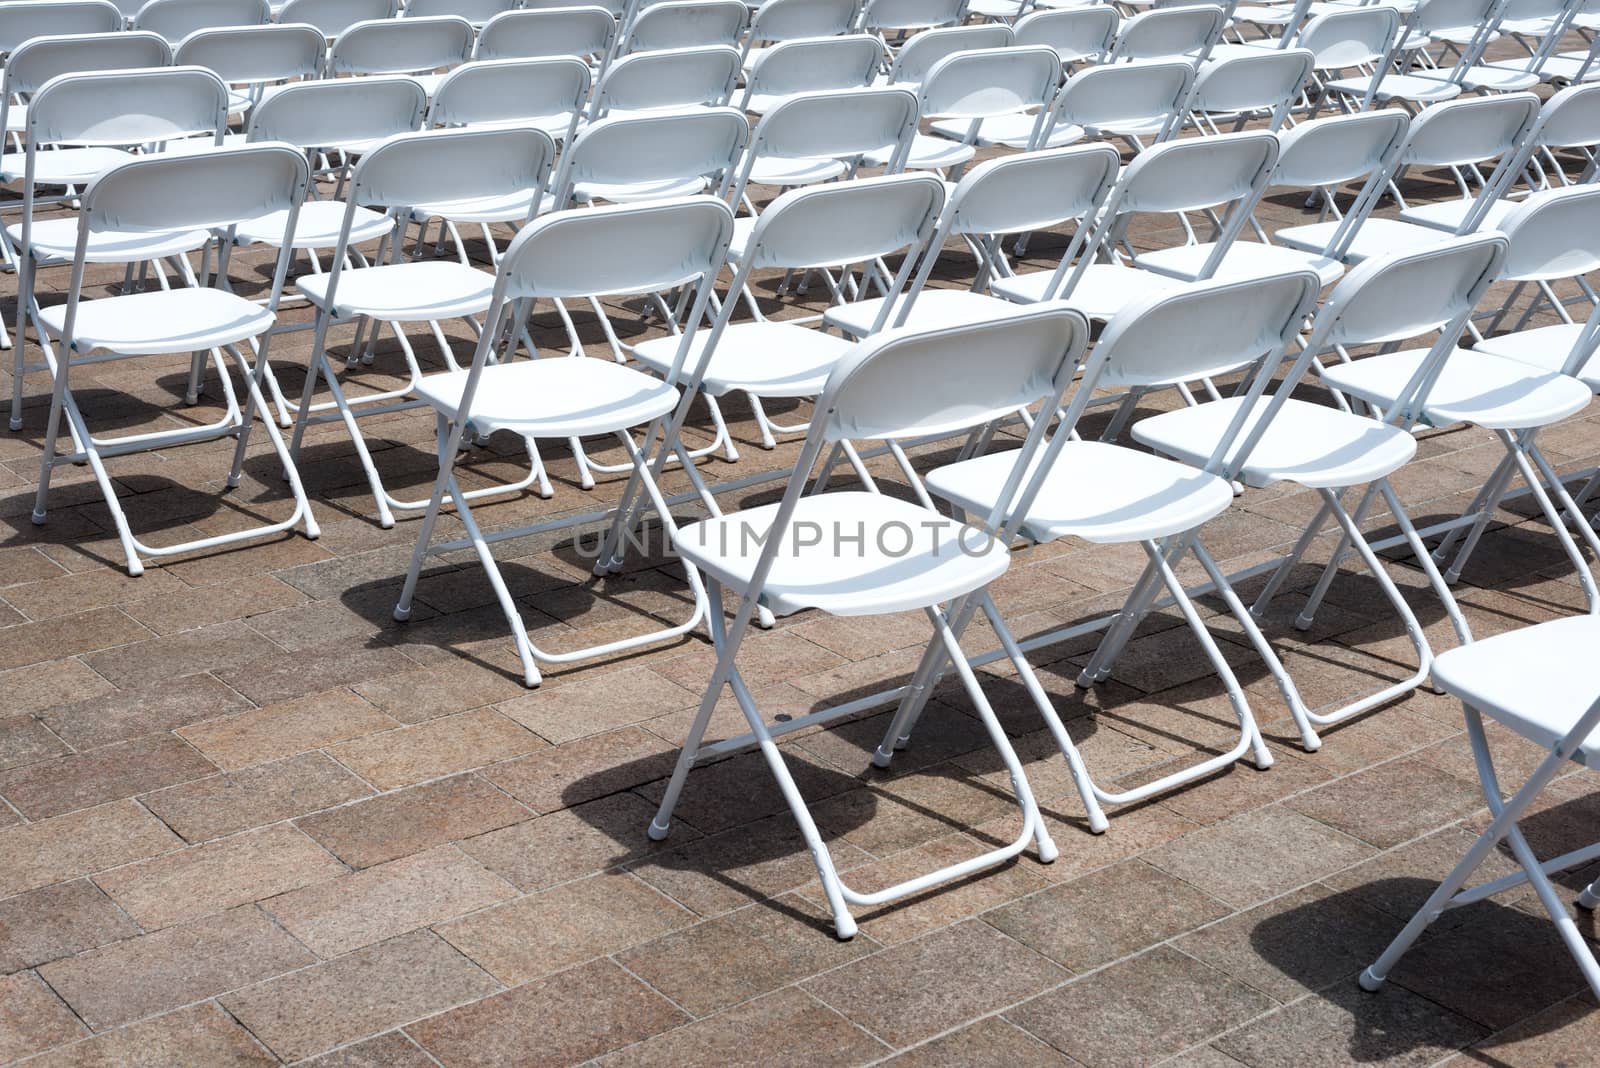 rows of folding chairs at event by DNKSTUDIO